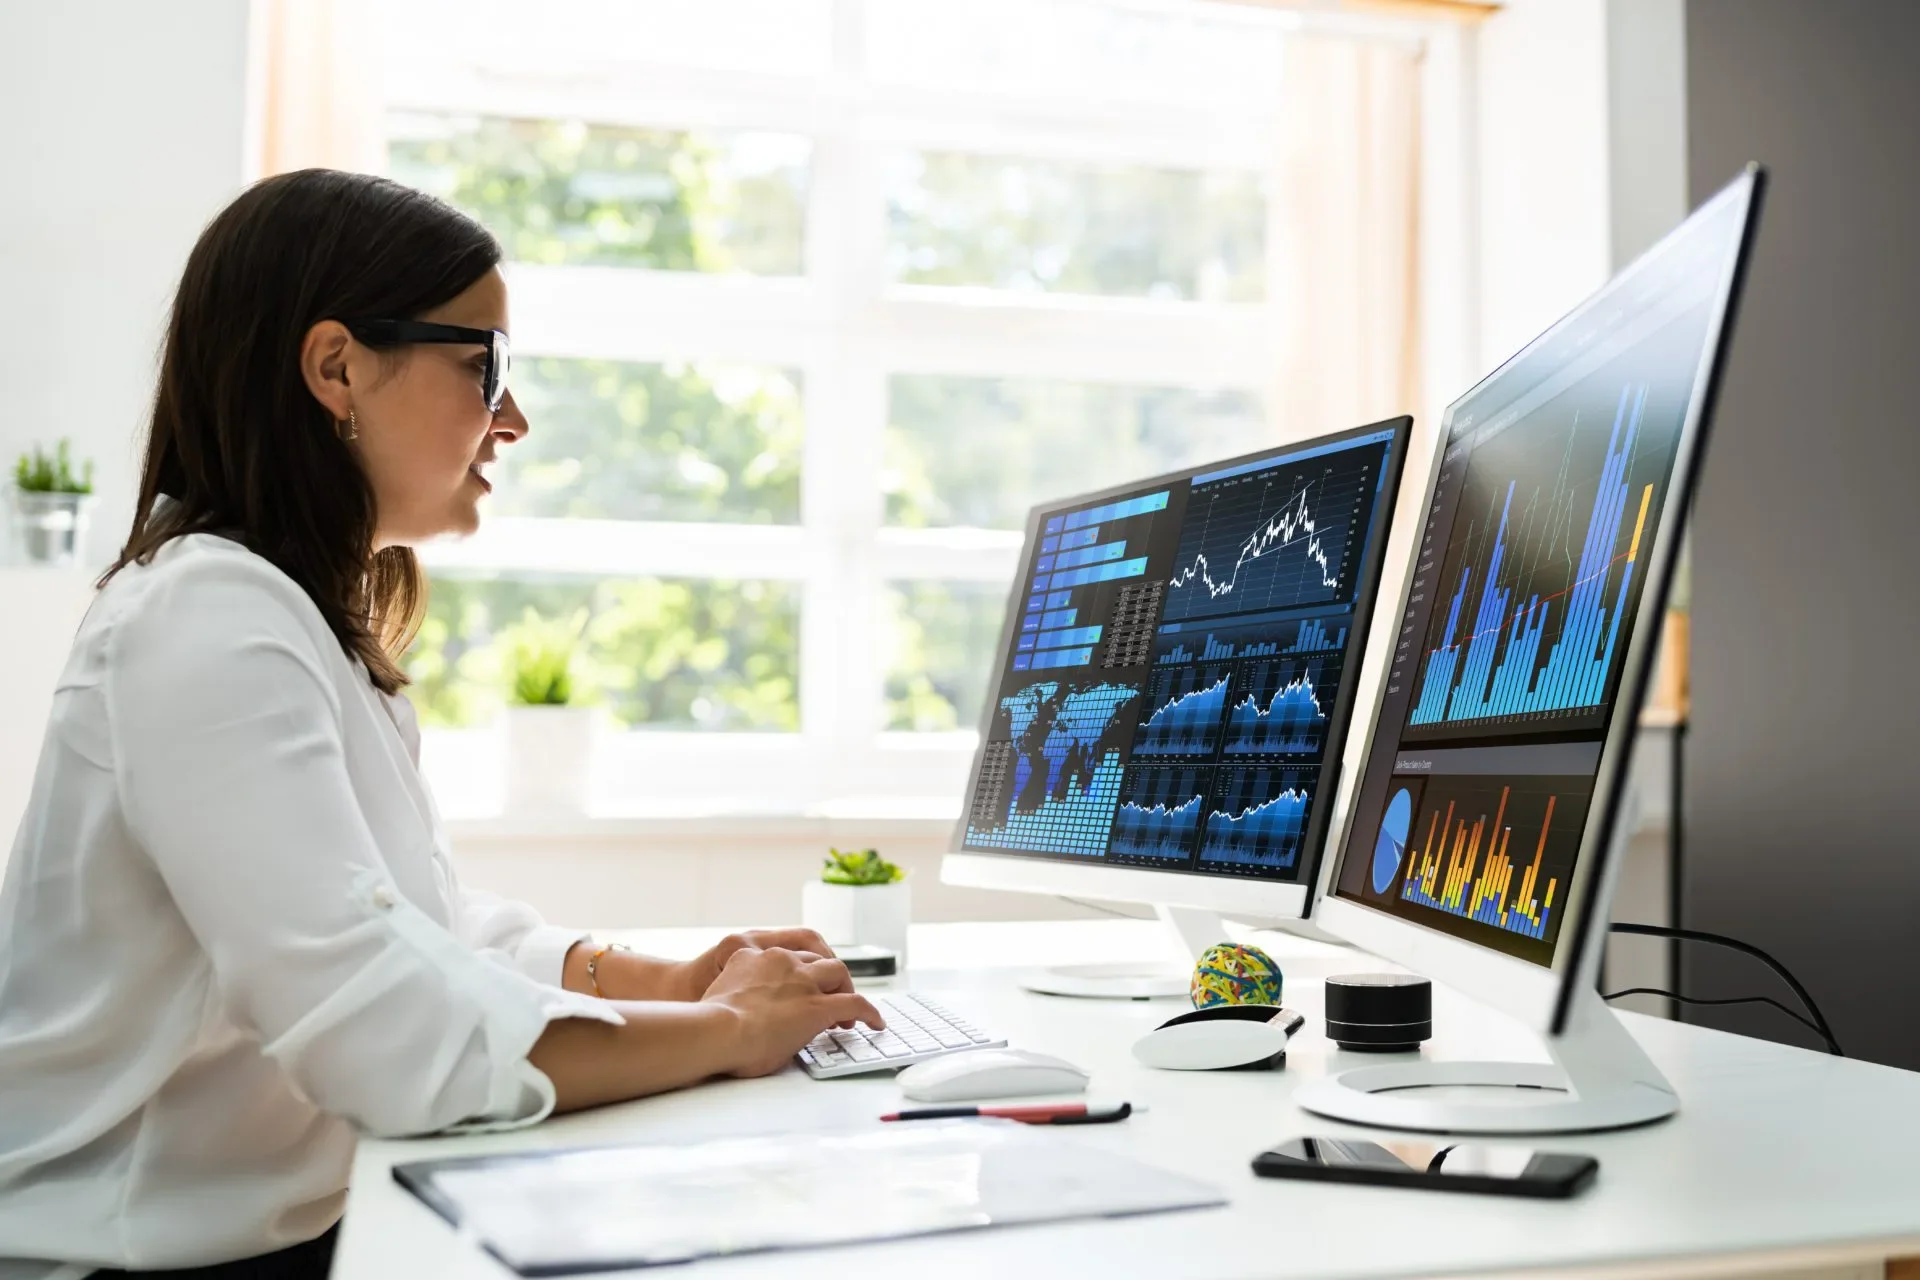 Woman at a desk looking at charts of data on two monitors.